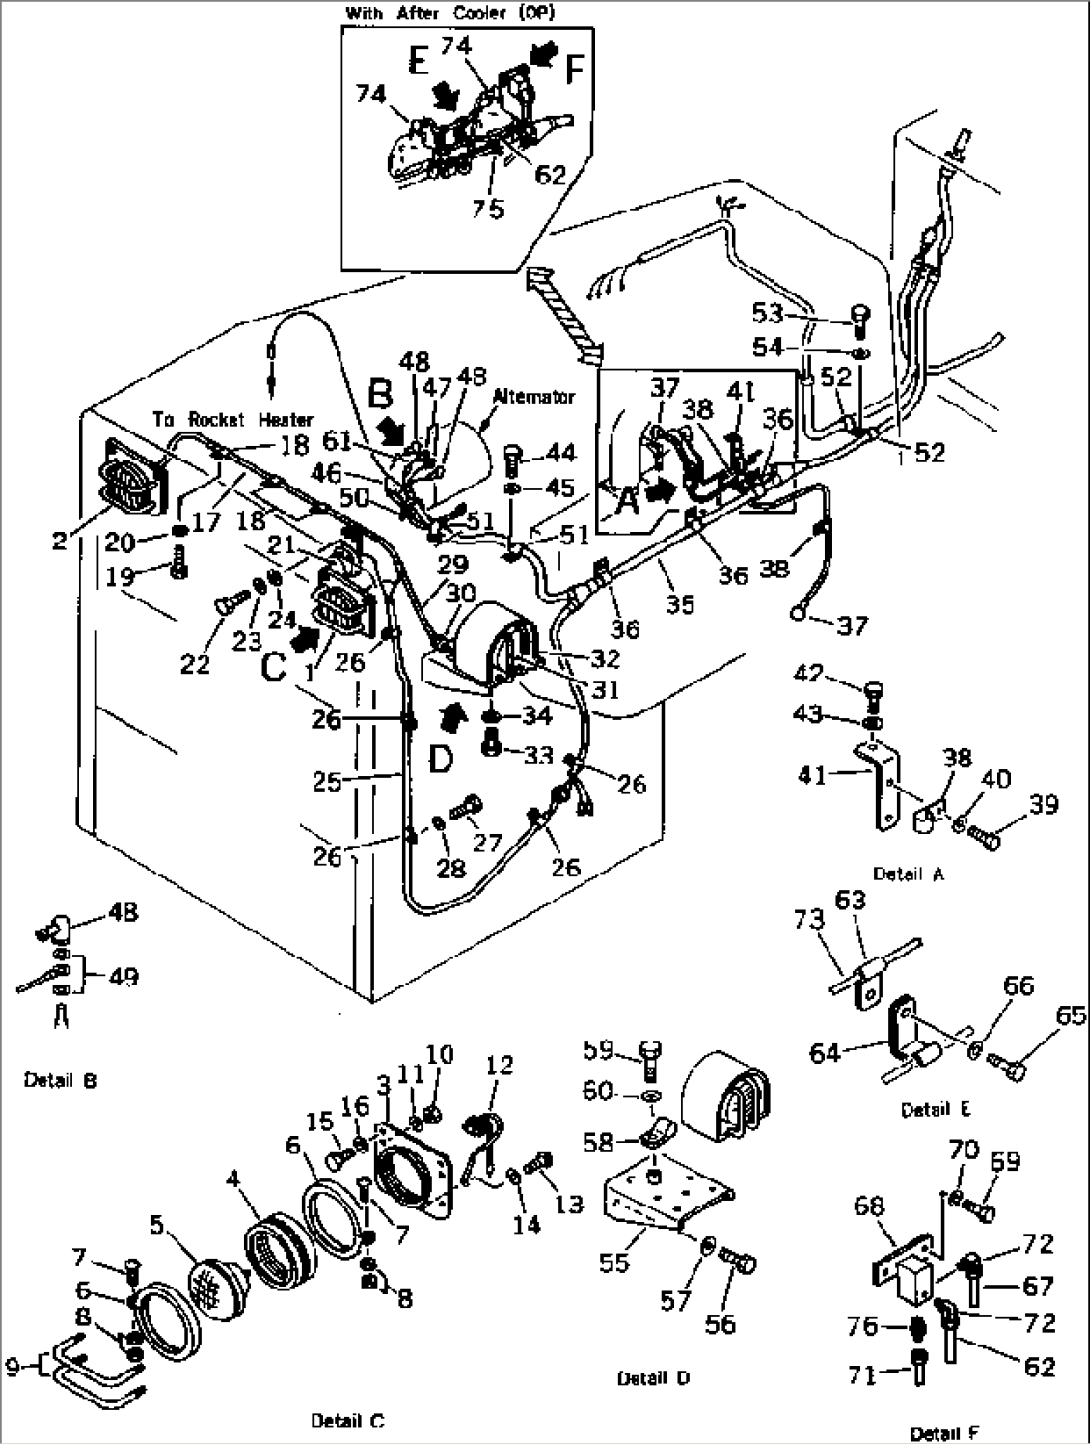 ELECTRICAL SYSTEM (2/3) (FOR ROCKET HEATER)(#12626-)